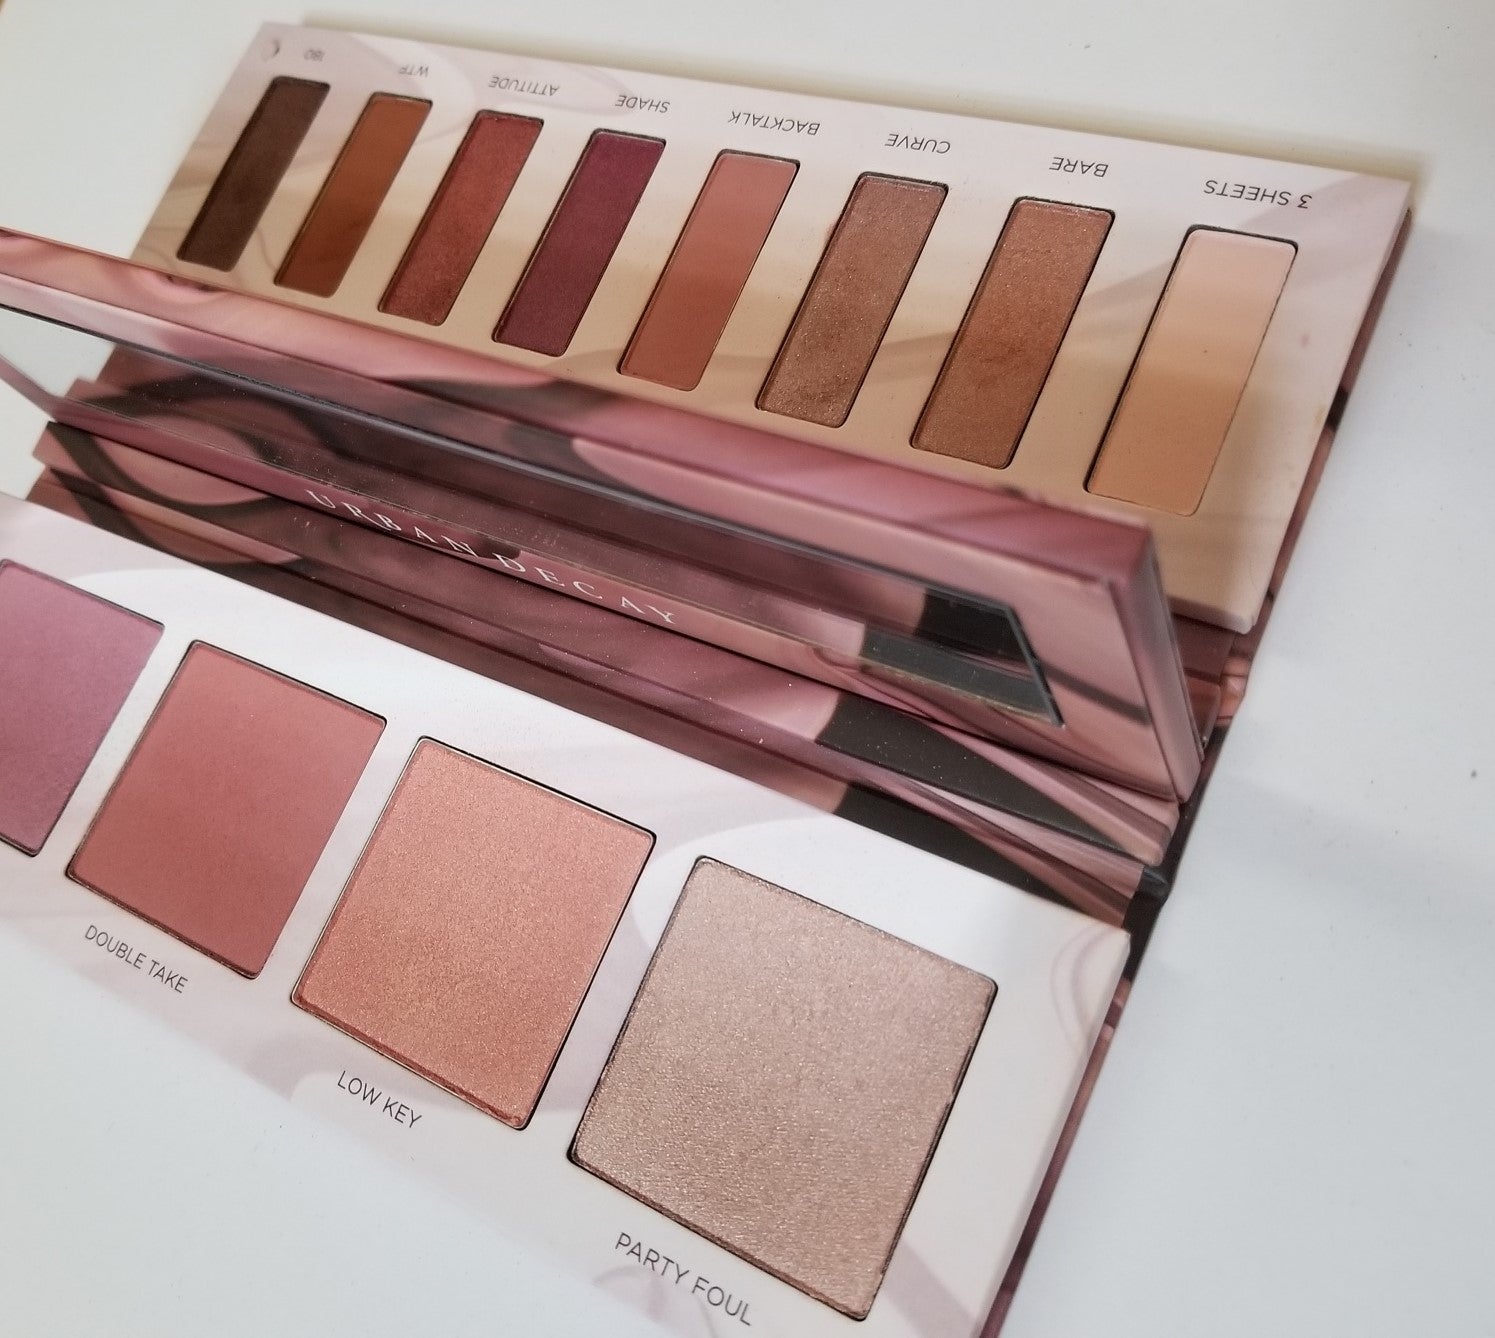 Review, Swatches, Photos, Makeup Trends 2018, 2019, 2020: Urban Decay Backtalk Eye & Face Palette, Vice Lipsticks, Bare, Curve, Backtalk, Shade, Attitude, WTF, 180, Cheap Shot, Double Take, Low Key, Party Foul